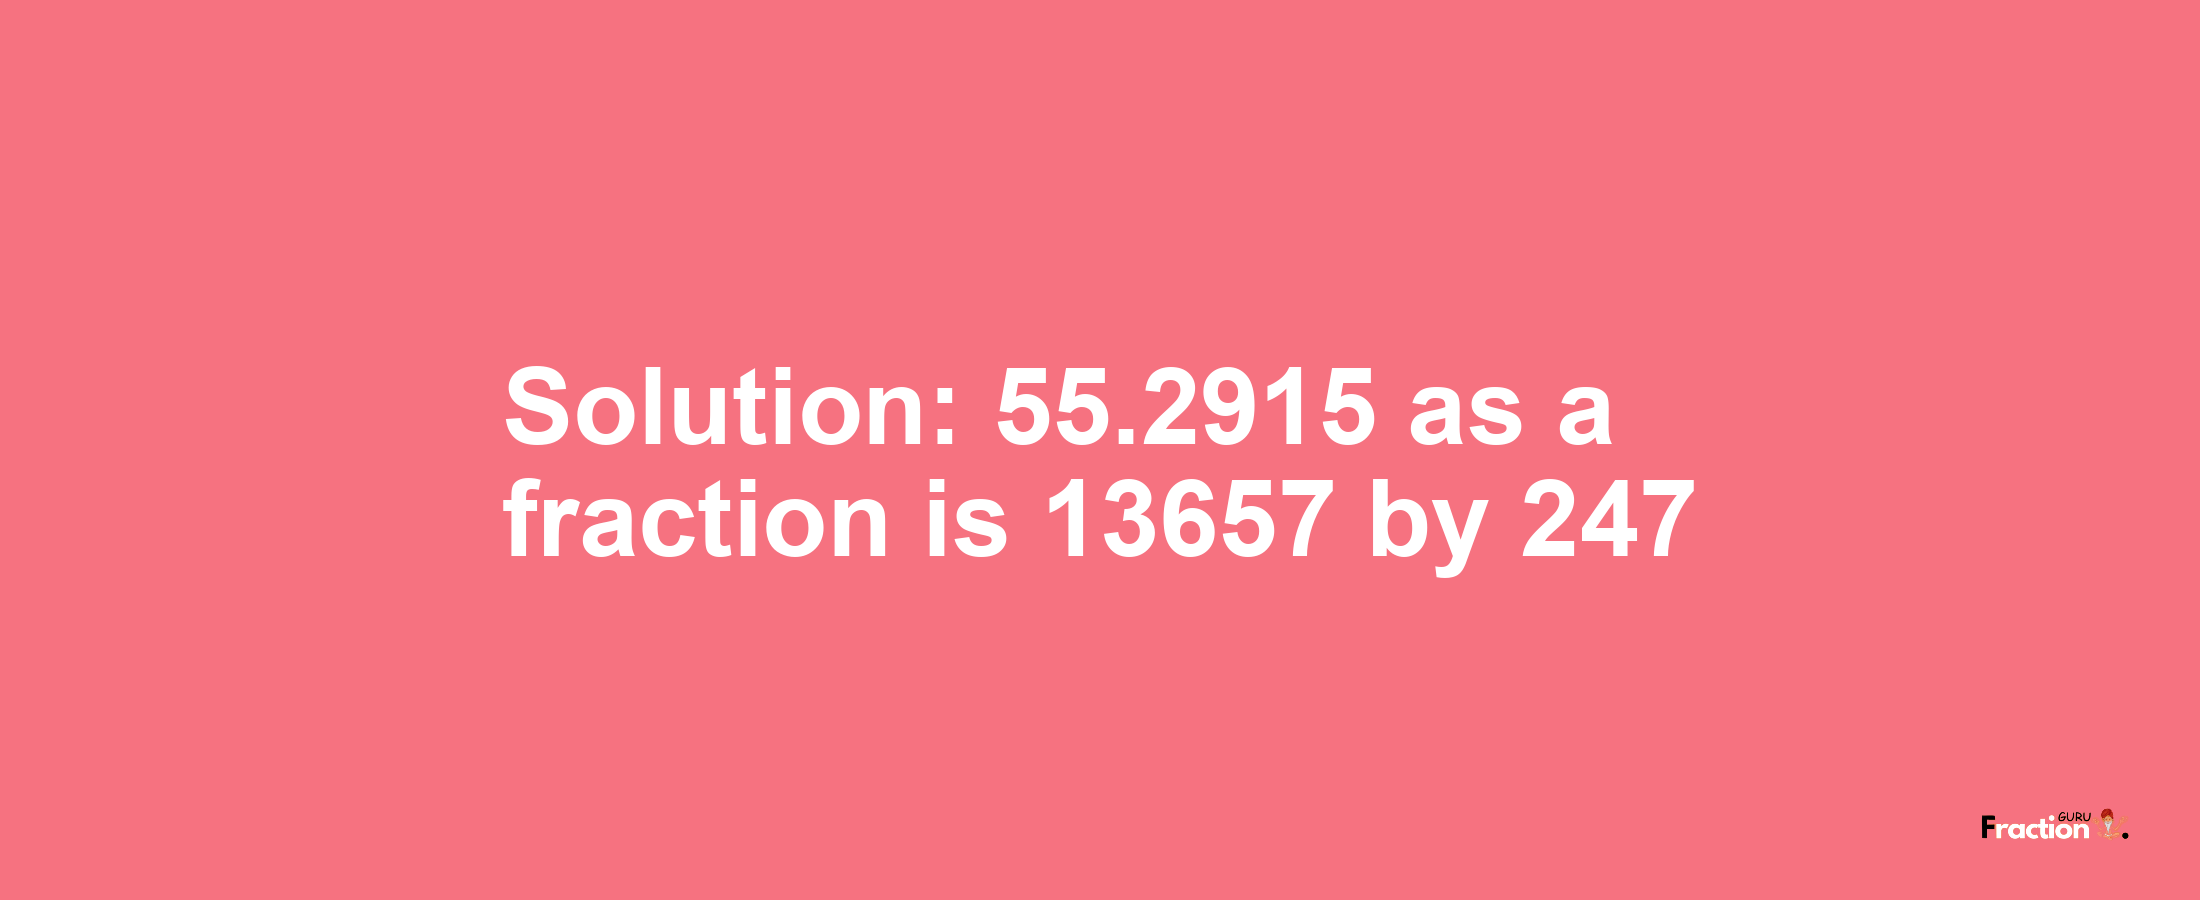 Solution:55.2915 as a fraction is 13657/247